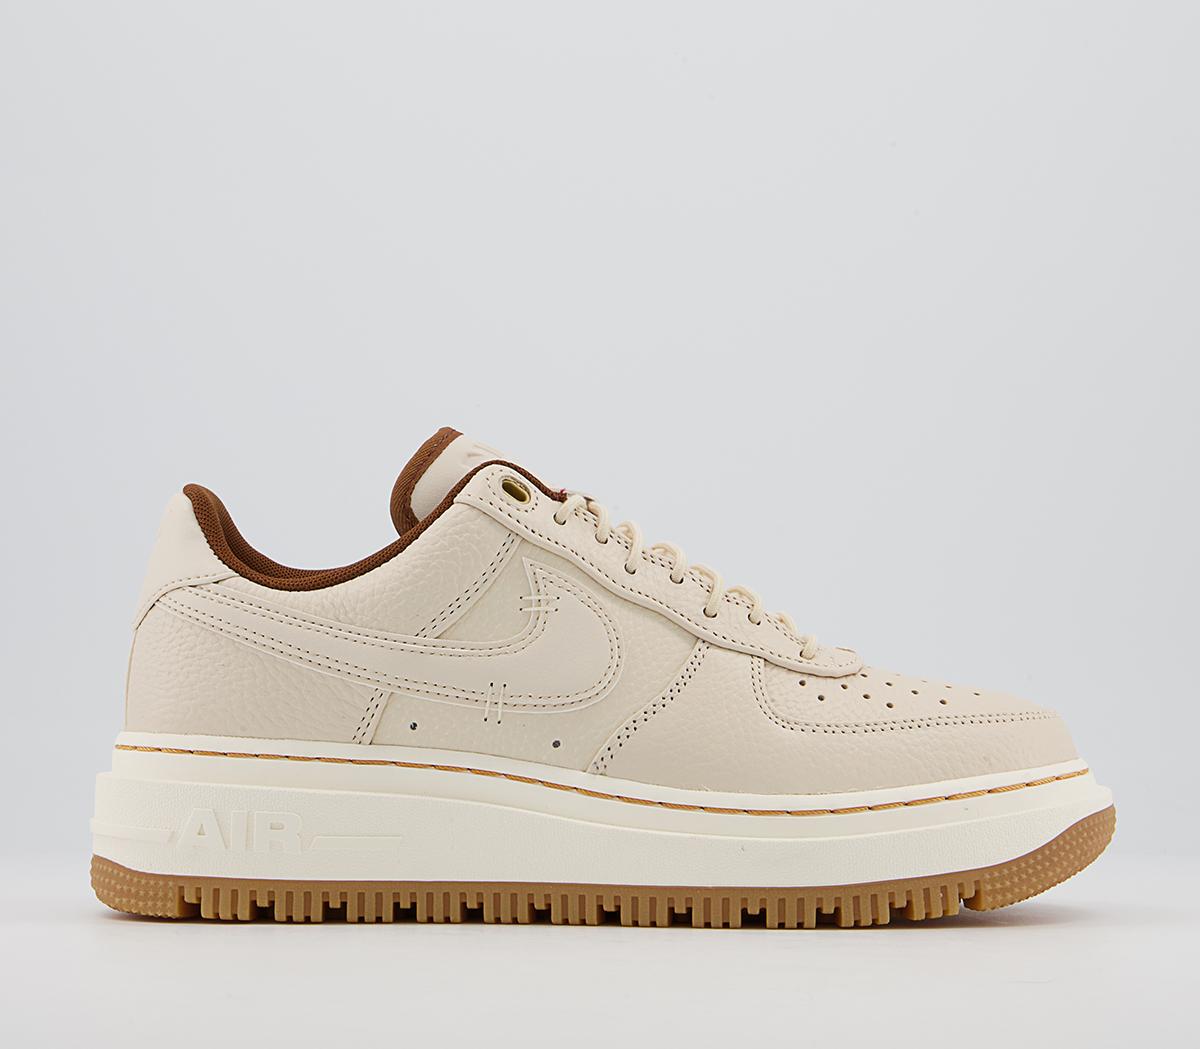 NikeAir Force 1 Luxe Trainers Pale White Pale Ivory Pecan Gum